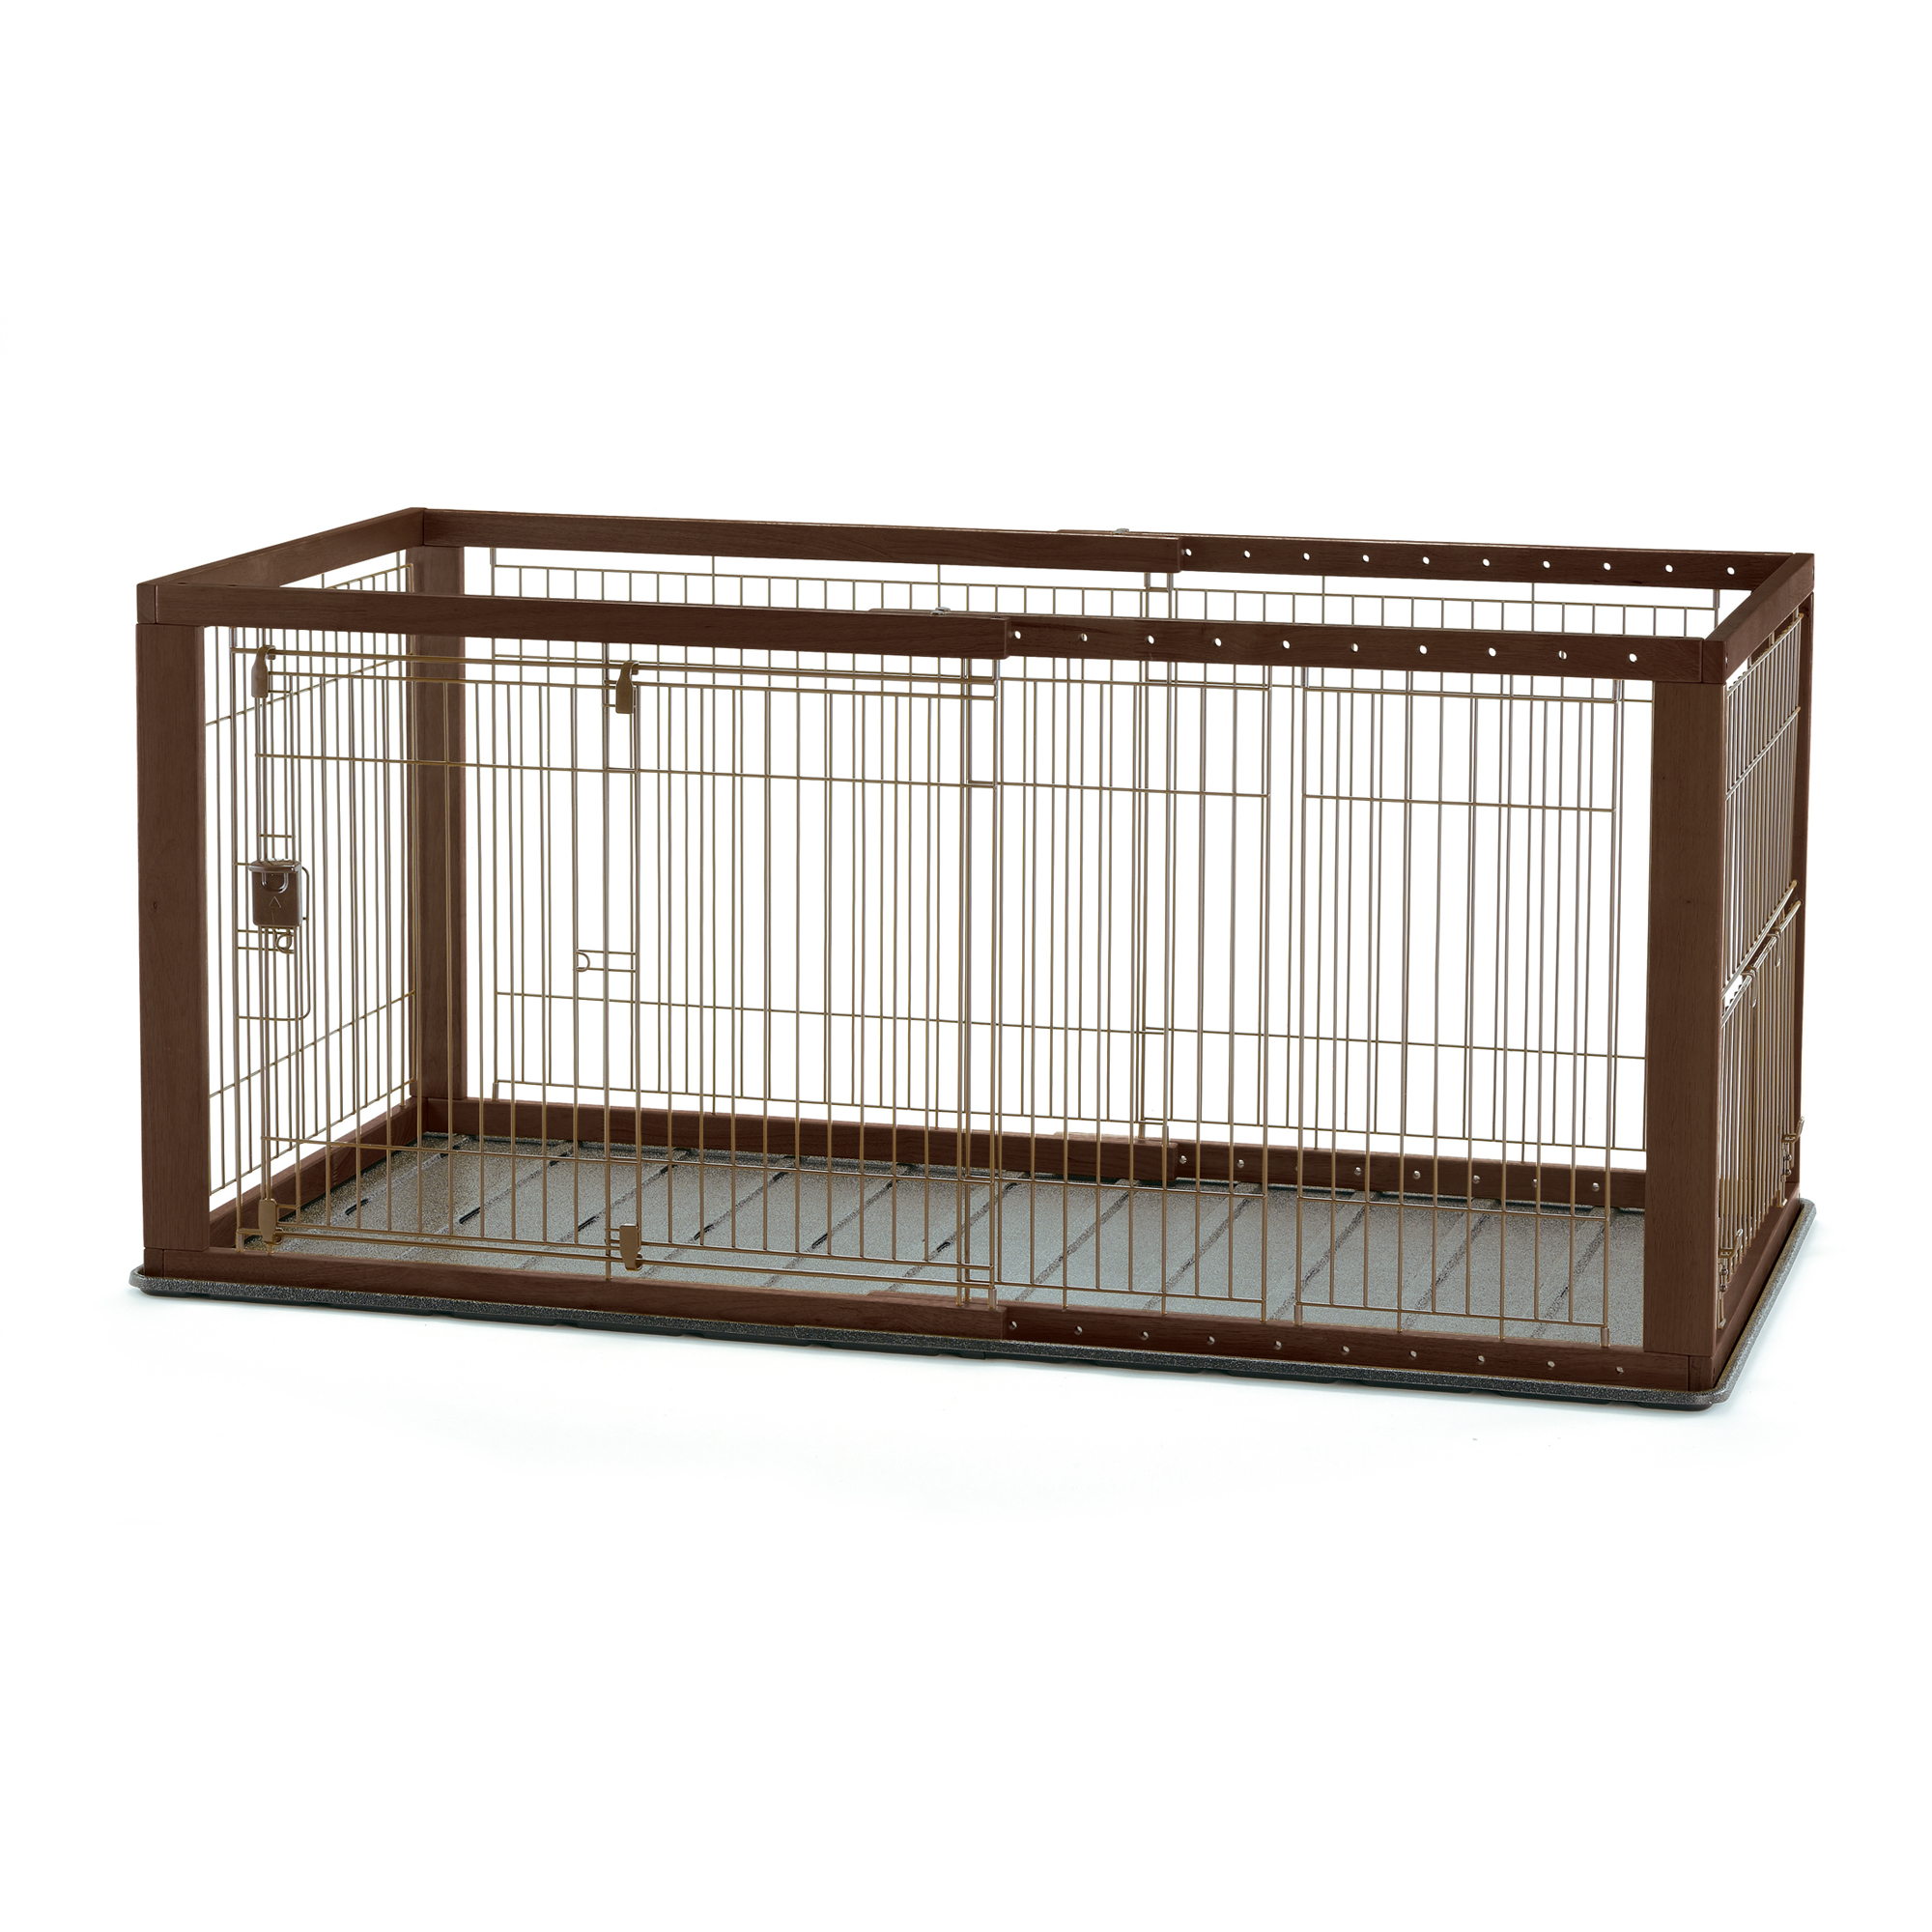 Expandable Dog Crates | Expandable Pet Crate | Dog Crate | Richell USA